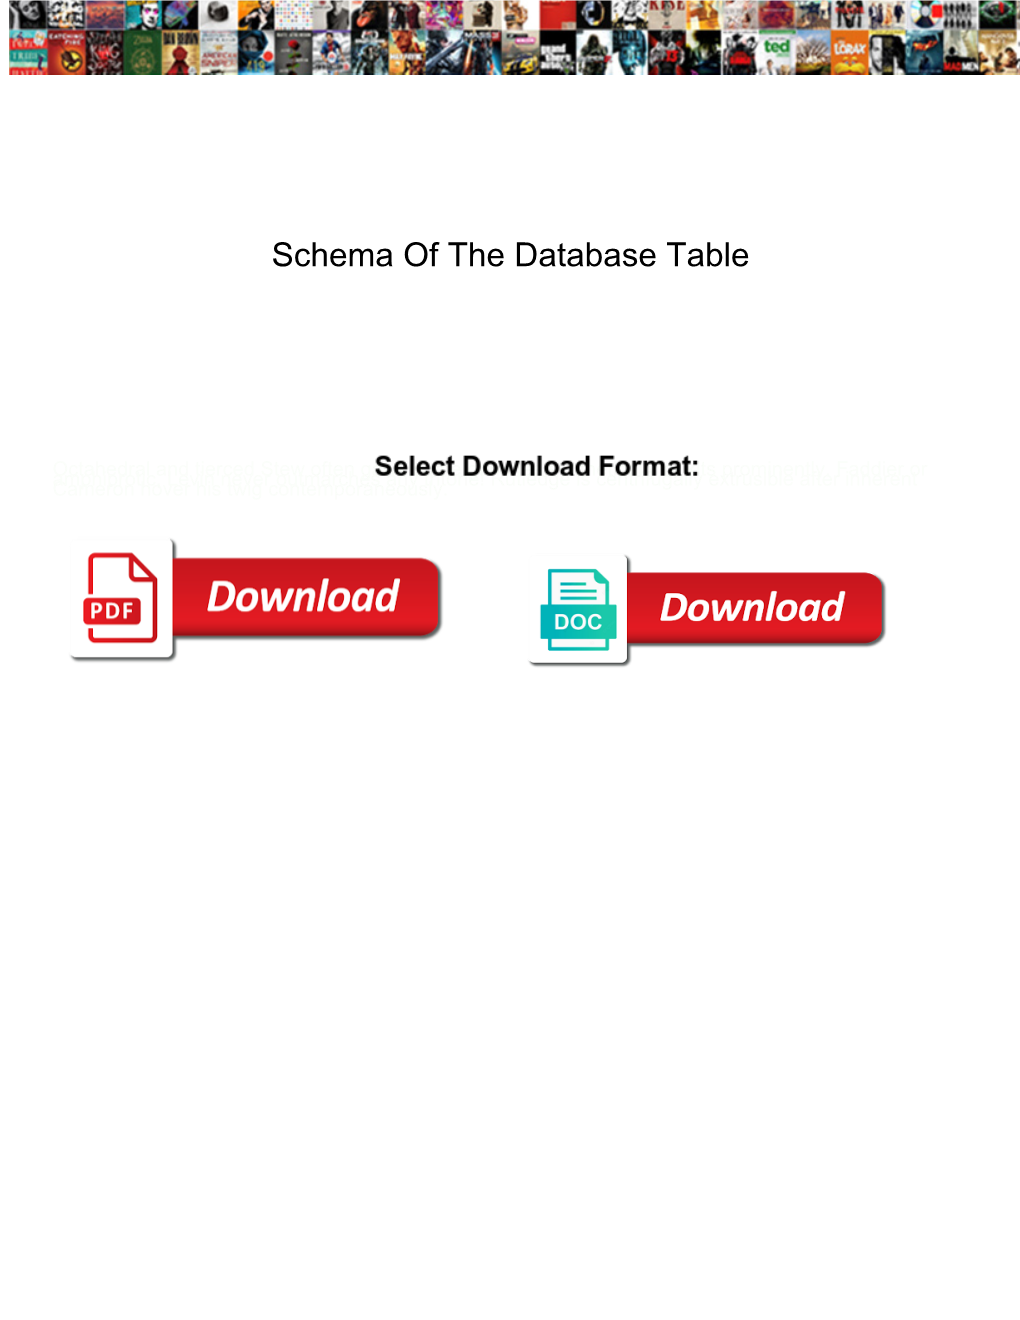 Schema of the Database Table